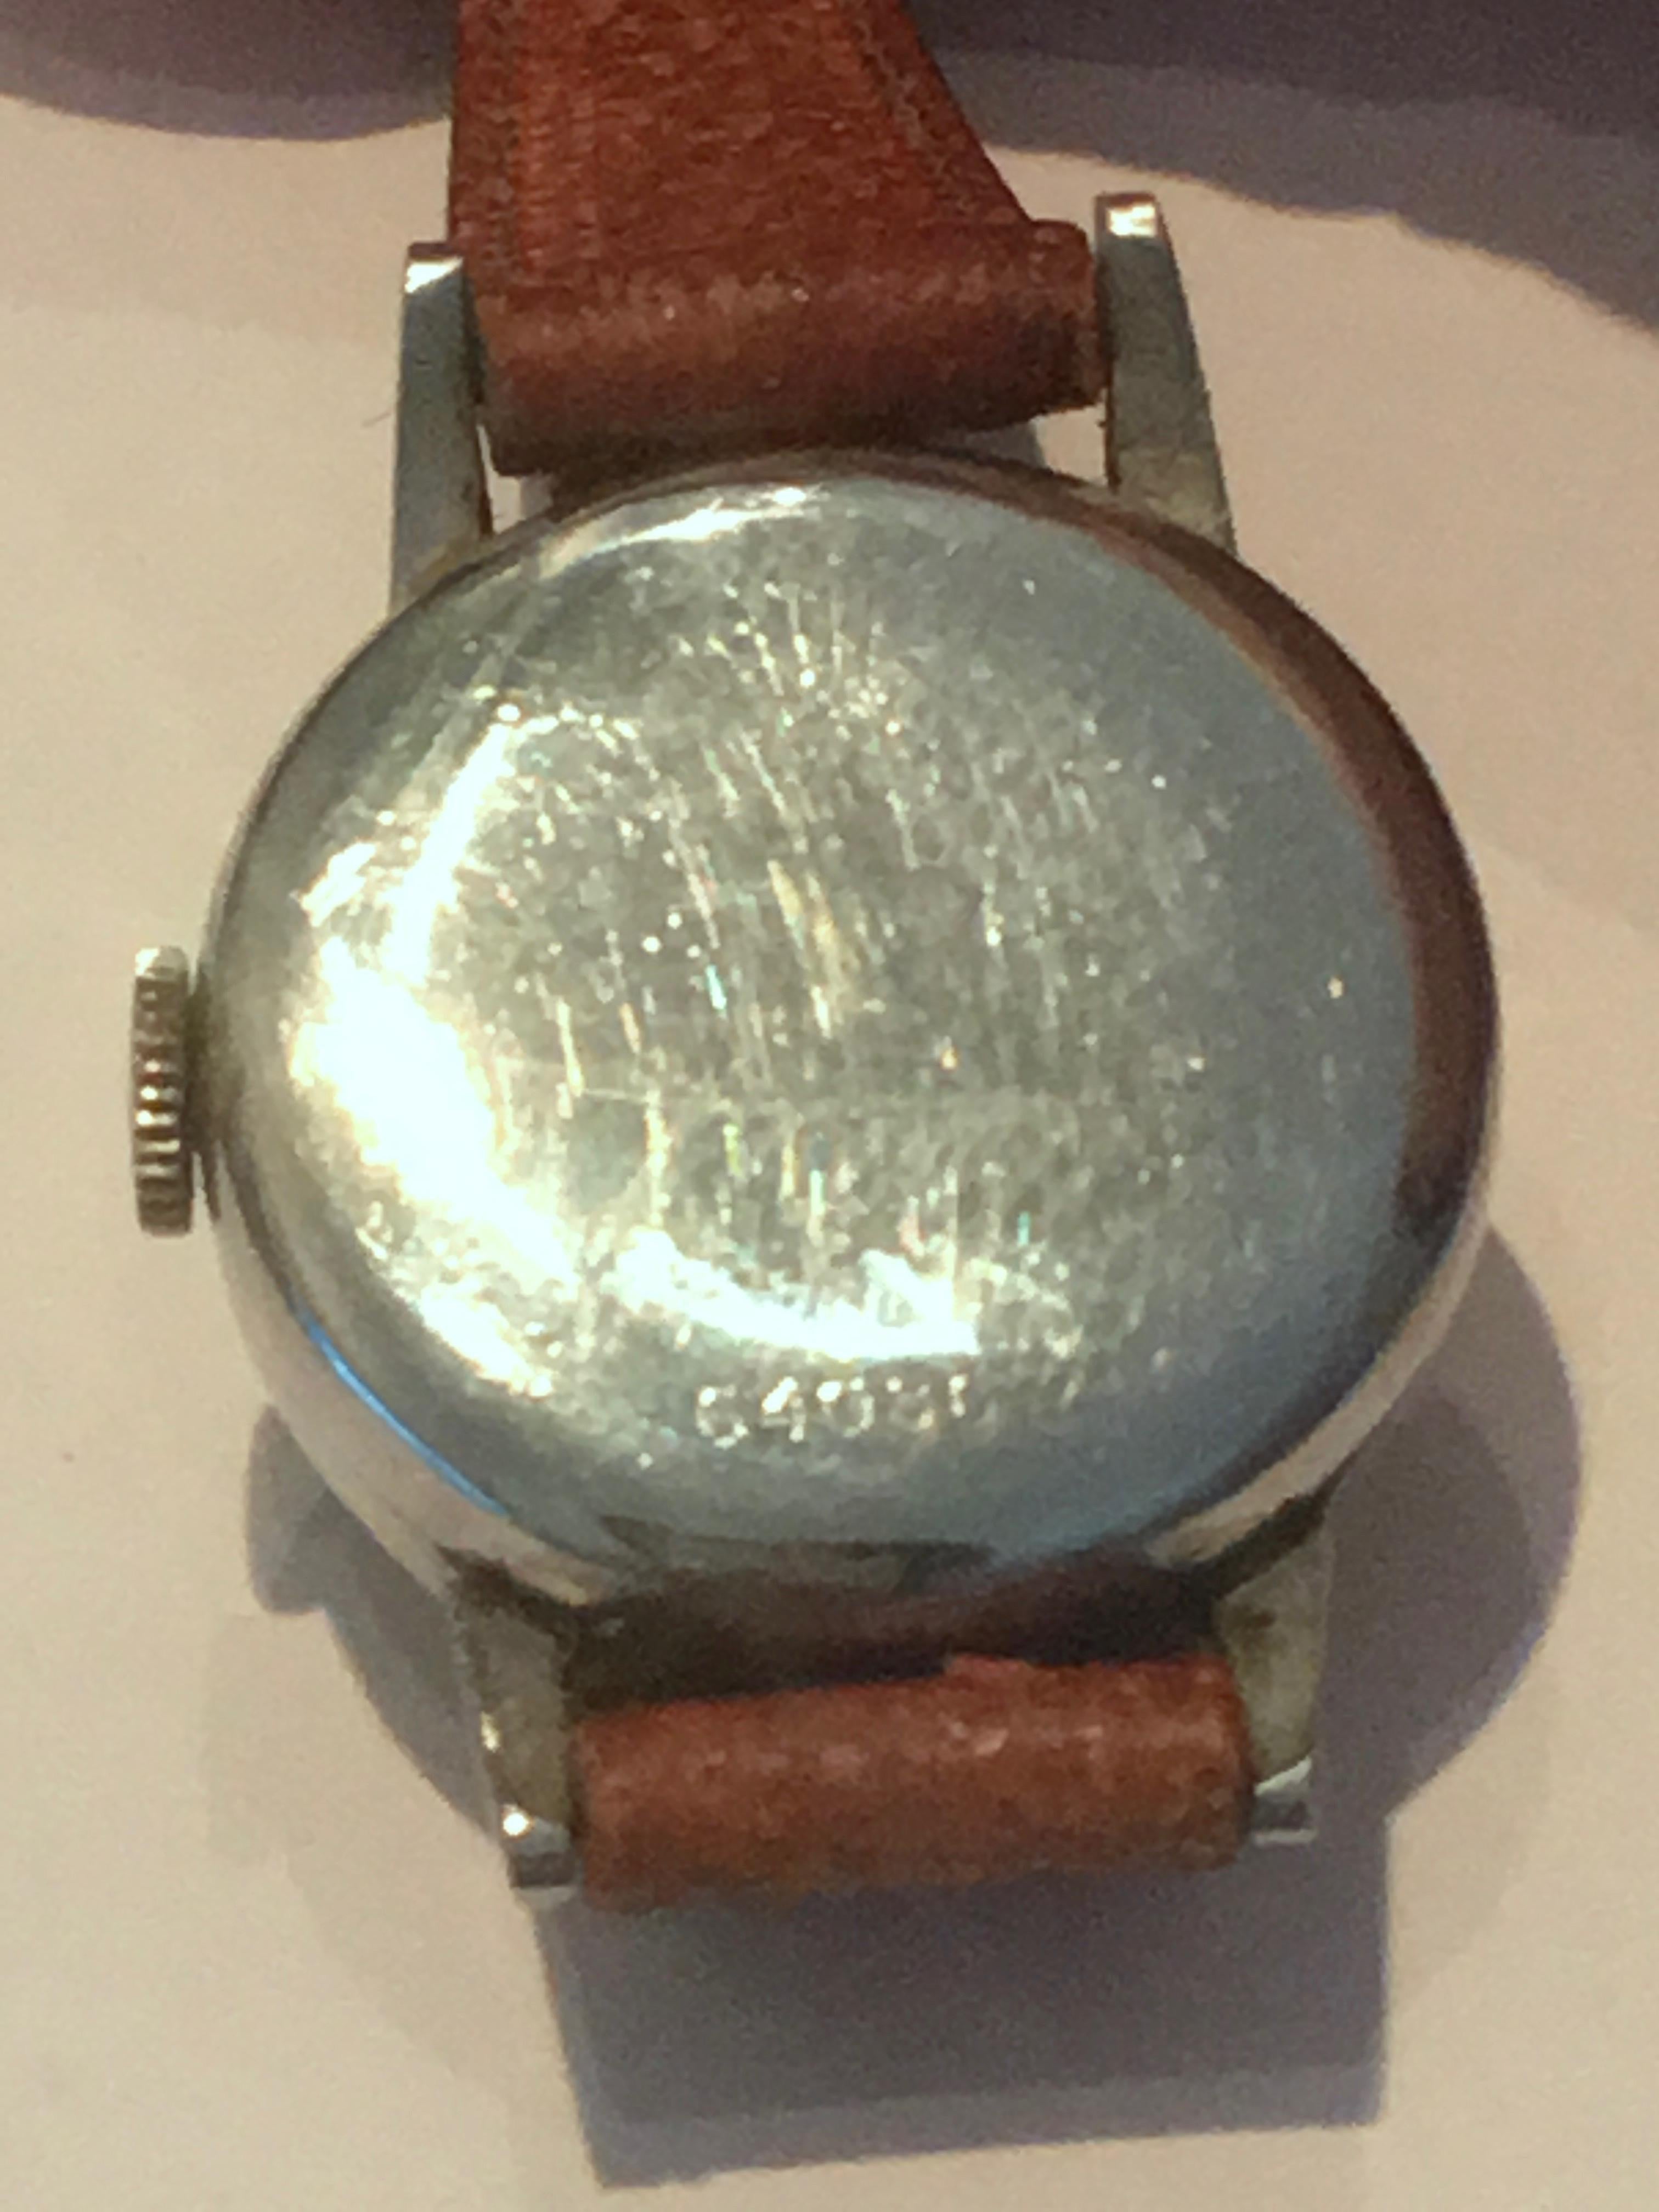 Rolex Precision 17 rubis super balance stainless steel Ladies watch.  Last two photos depict magnified details of back.  Period correct pigskin strap.